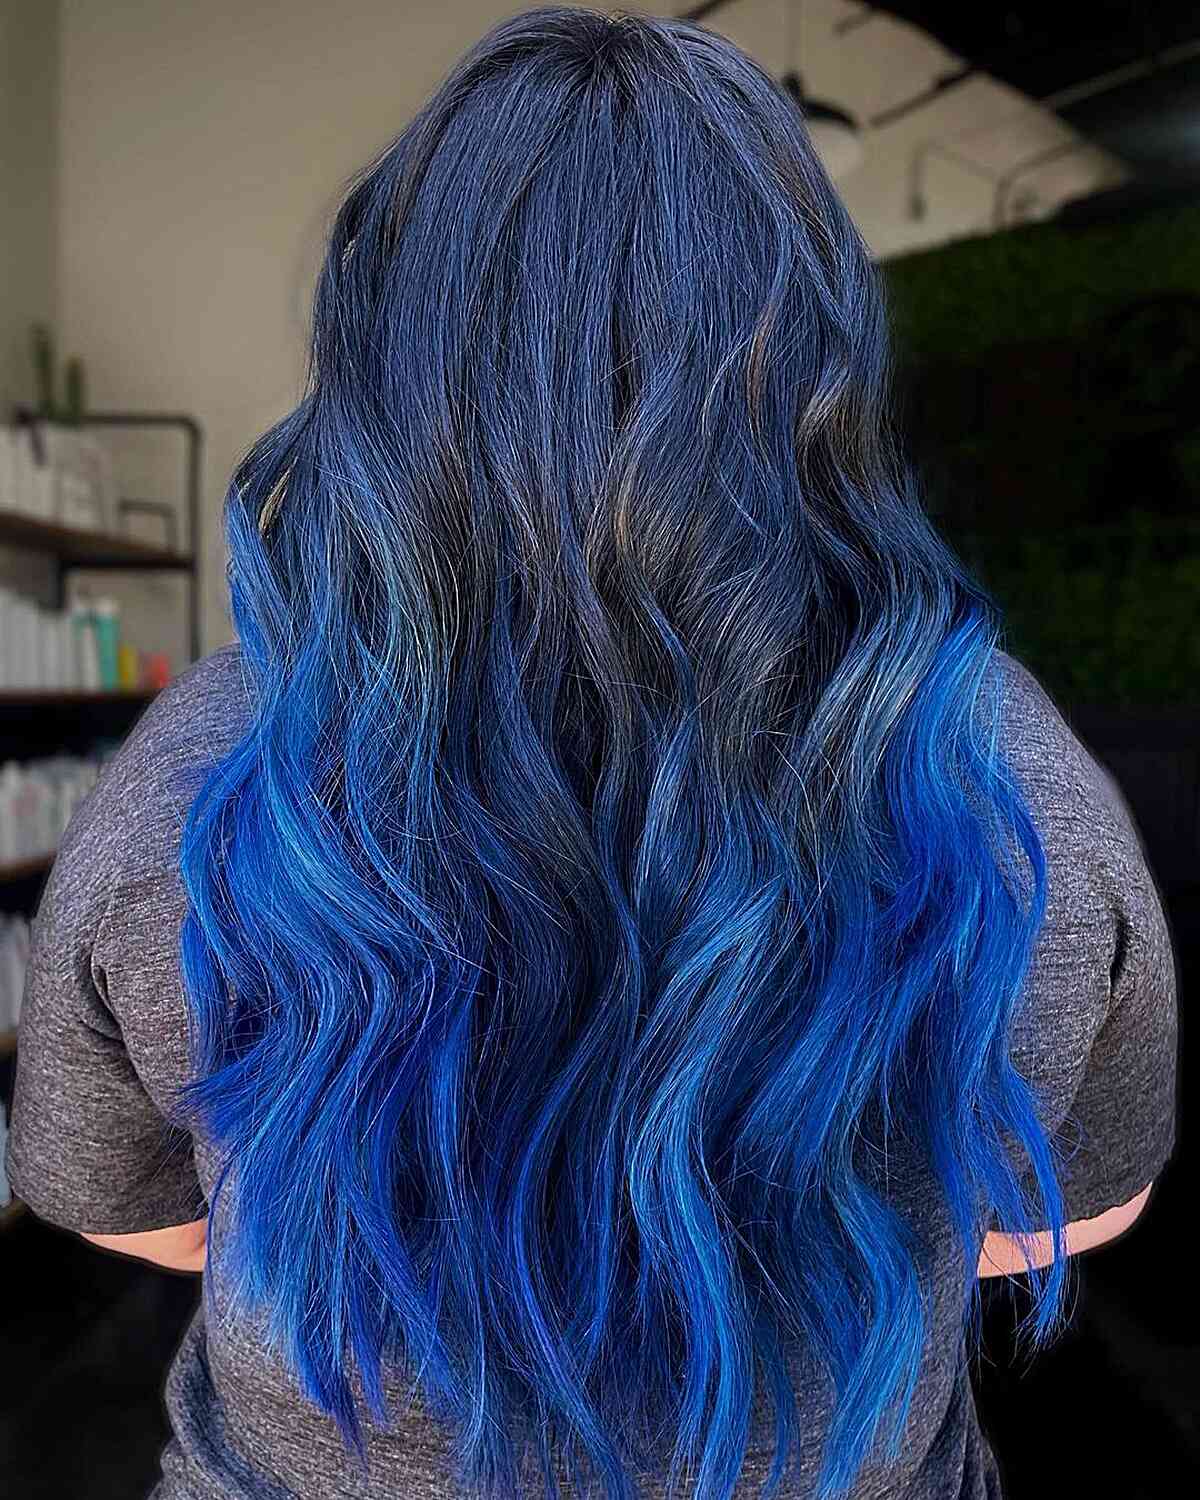 Midnight to Vivid Blue Ombre Hair